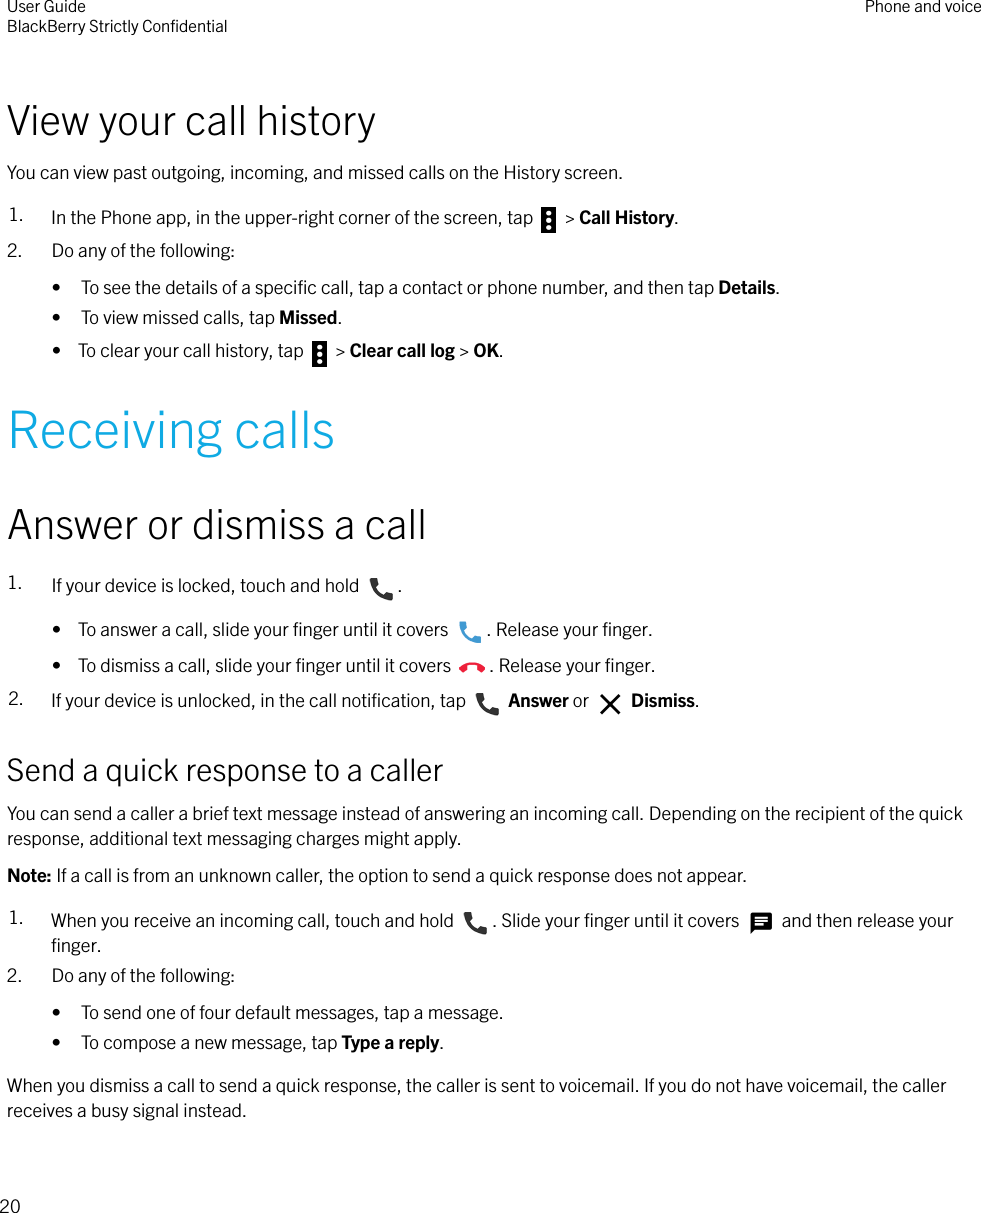 View your call historyYou can view past outgoing, incoming, and missed calls on the History screen.1. In the Phone app, in the upper-right corner of the screen, tap   &gt; Call History.2. Do any of the following:• To see the details of a speciﬁc call, tap a contact or phone number, and then tap Details.• To view missed calls, tap Missed.•  To clear your call history, tap   &gt; Clear call log &gt; OK.Receiving callsAnswer or dismiss a call1. If your device is locked, touch and hold  .•  To answer a call, slide your ﬁnger until it covers  . Release your ﬁnger.•  To dismiss a call, slide your ﬁnger until it covers  . Release your ﬁnger.2. If your device is unlocked, in the call notiﬁcation, tap   Answer or   Dismiss.Send a quick response to a callerYou can send a caller a brief text message instead of answering an incoming call. Depending on the recipient of the quickresponse, additional text messaging charges might apply.Note: If a call is from an unknown caller, the option to send a quick response does not appear.1. When you receive an incoming call, touch and hold  . Slide your ﬁnger until it covers   and then release yourﬁnger.2. Do any of the following:• To send one of four default messages, tap a message.• To compose a new message, tap Type a reply.When you dismiss a call to send a quick response, the caller is sent to voicemail. If you do not have voicemail, the callerreceives a busy signal instead.User GuideBlackBerry Strictly ConﬁdentialPhone and voice20